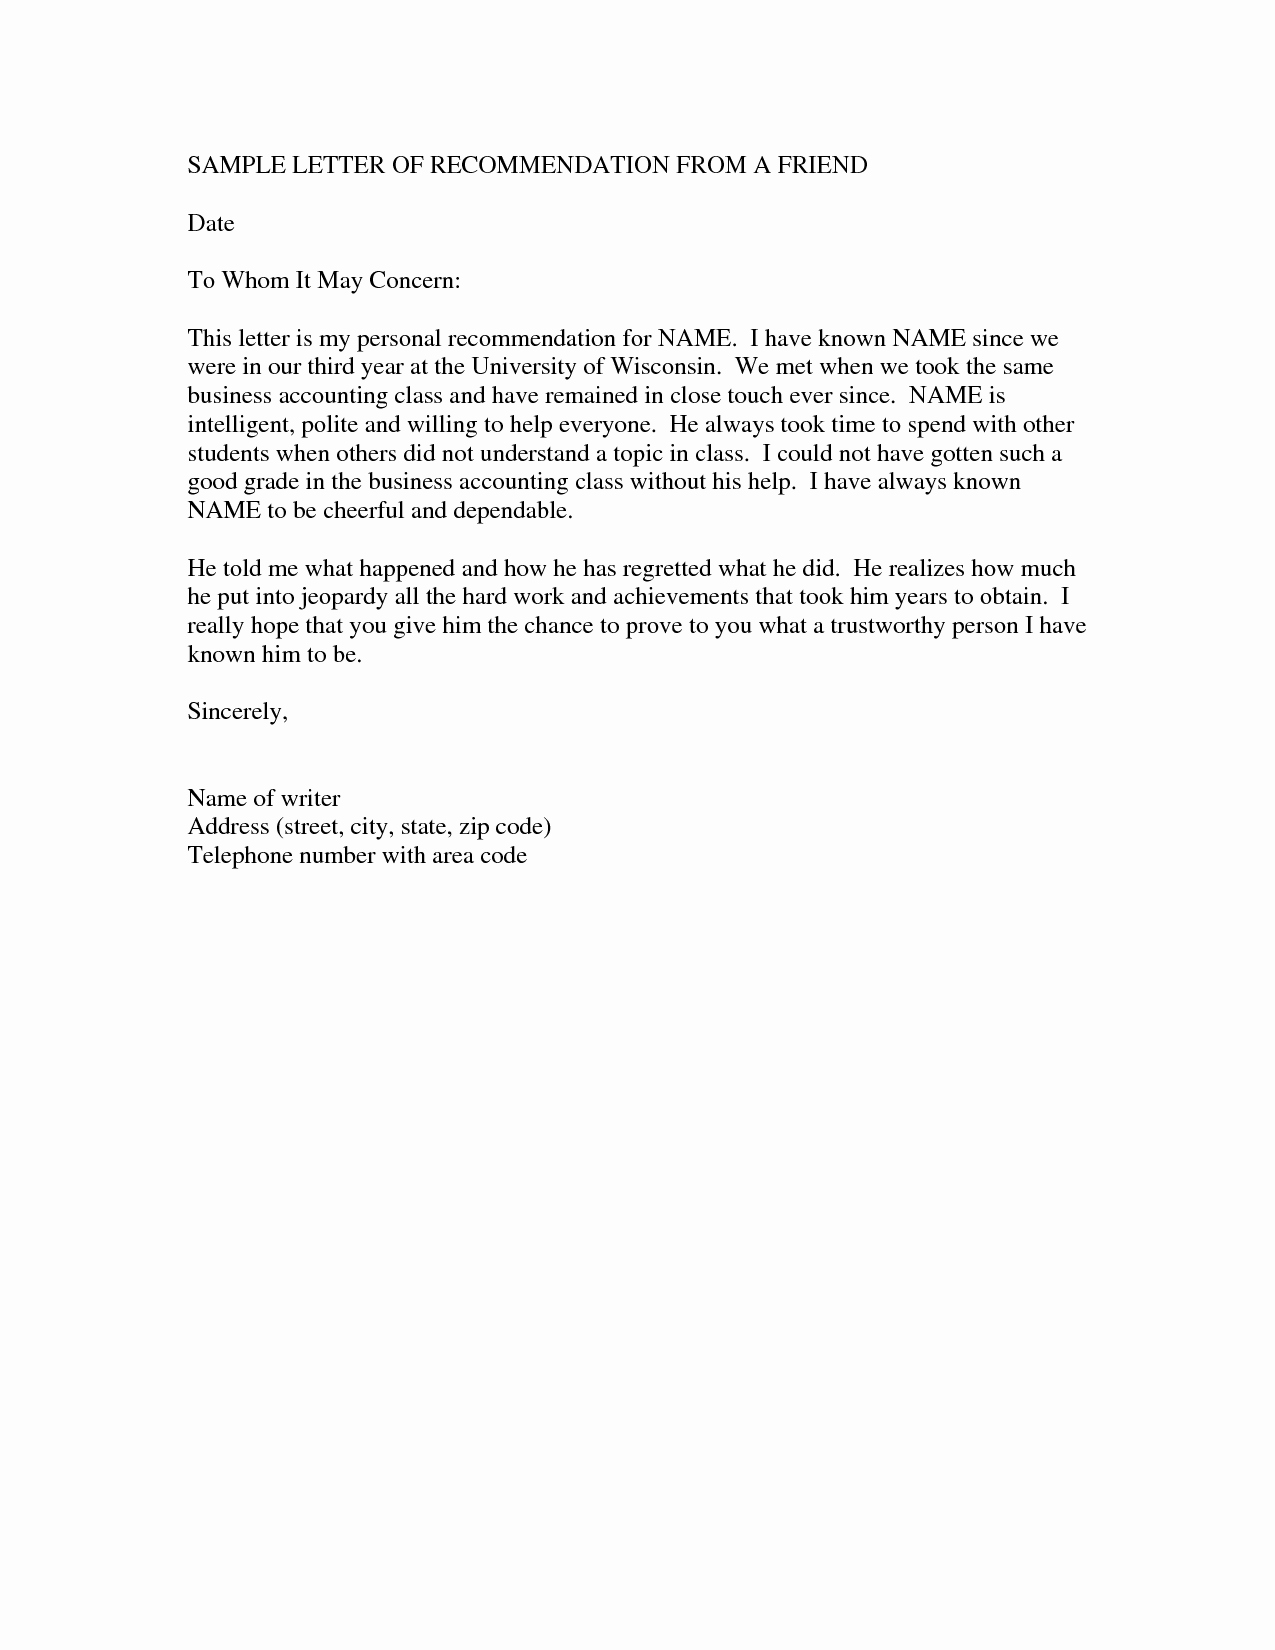 Letter to A Friend format Beautiful Reference Letter Examples for A Friend Line Business